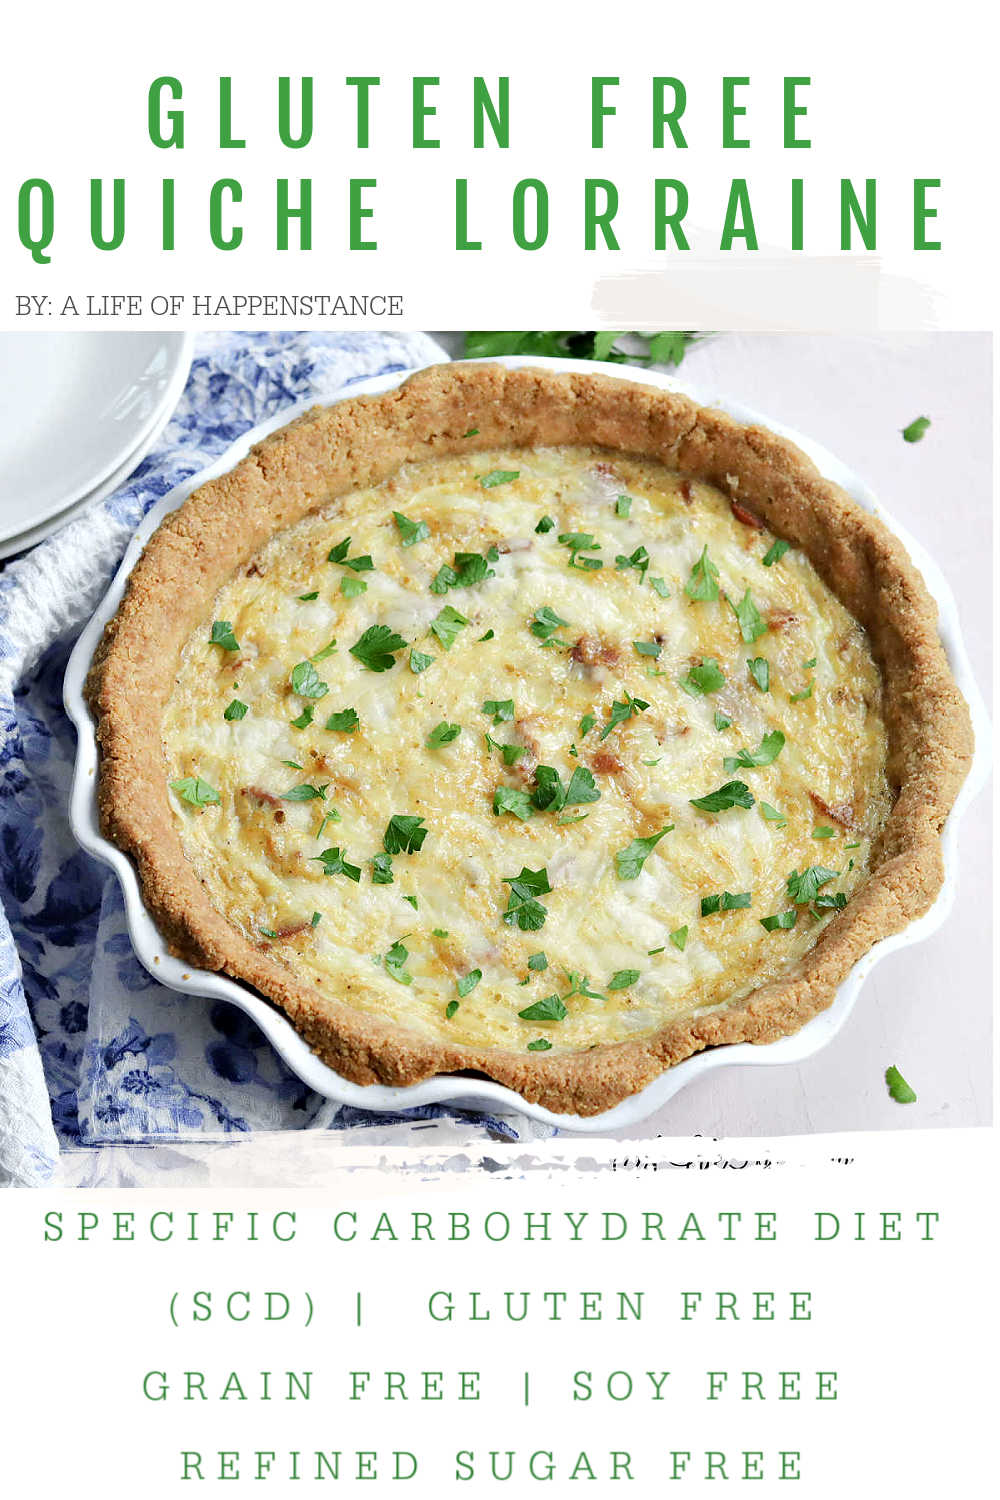 This Gluten Free Quiche Lorraine recipe has an easy almond flour crust that's filled with a savory egg custard. The additions of caramelized onions, bacon, and cheese take this delicious quiche over the top! The recipe is SCD, gluten free, grain free, soy free, added sugar free, and low lactose.